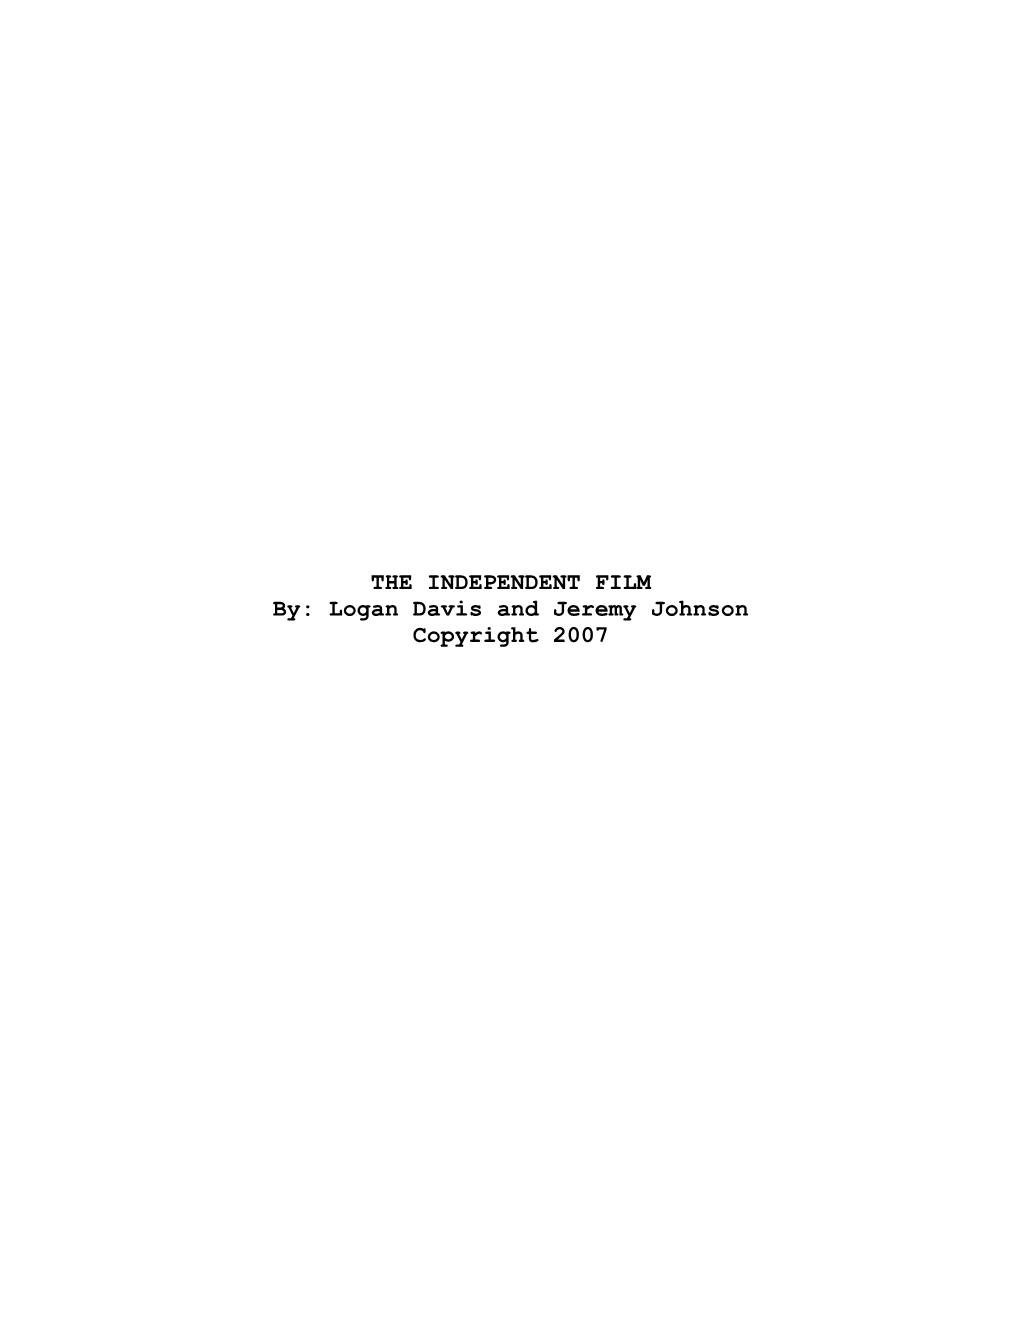 THE INDEPENDENT FILM (Draft 1)